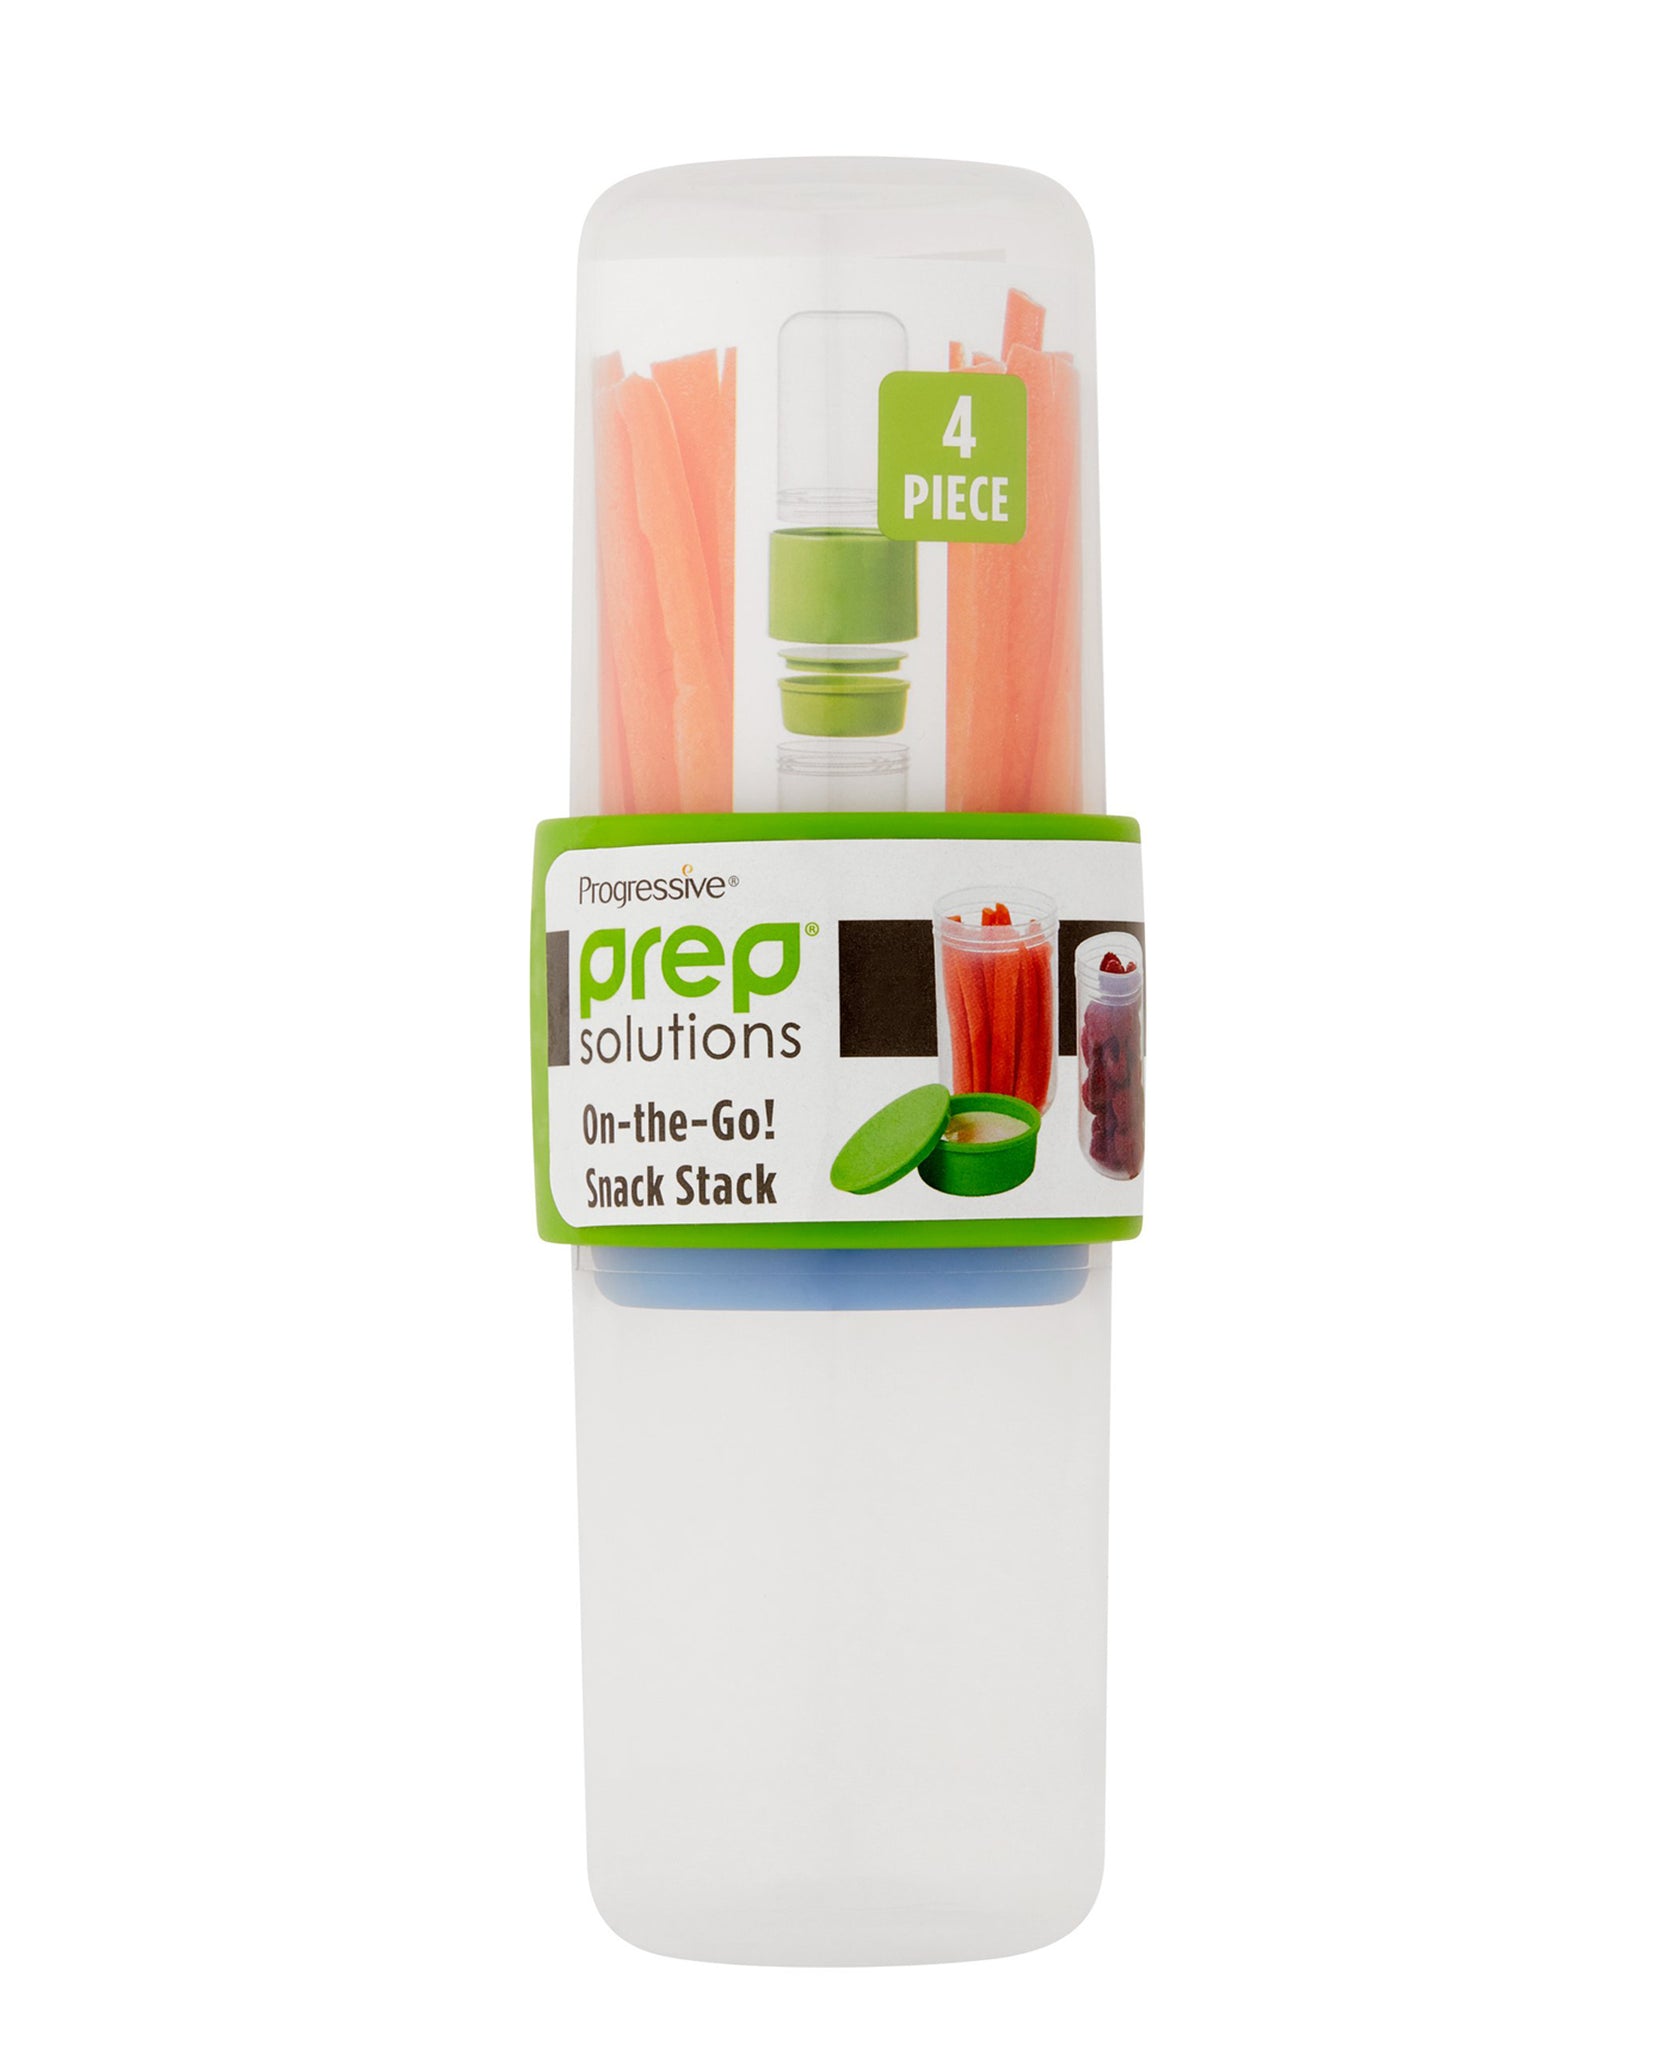 Progressive Prep Solutions On-the-Go! Snack Stack - Clear